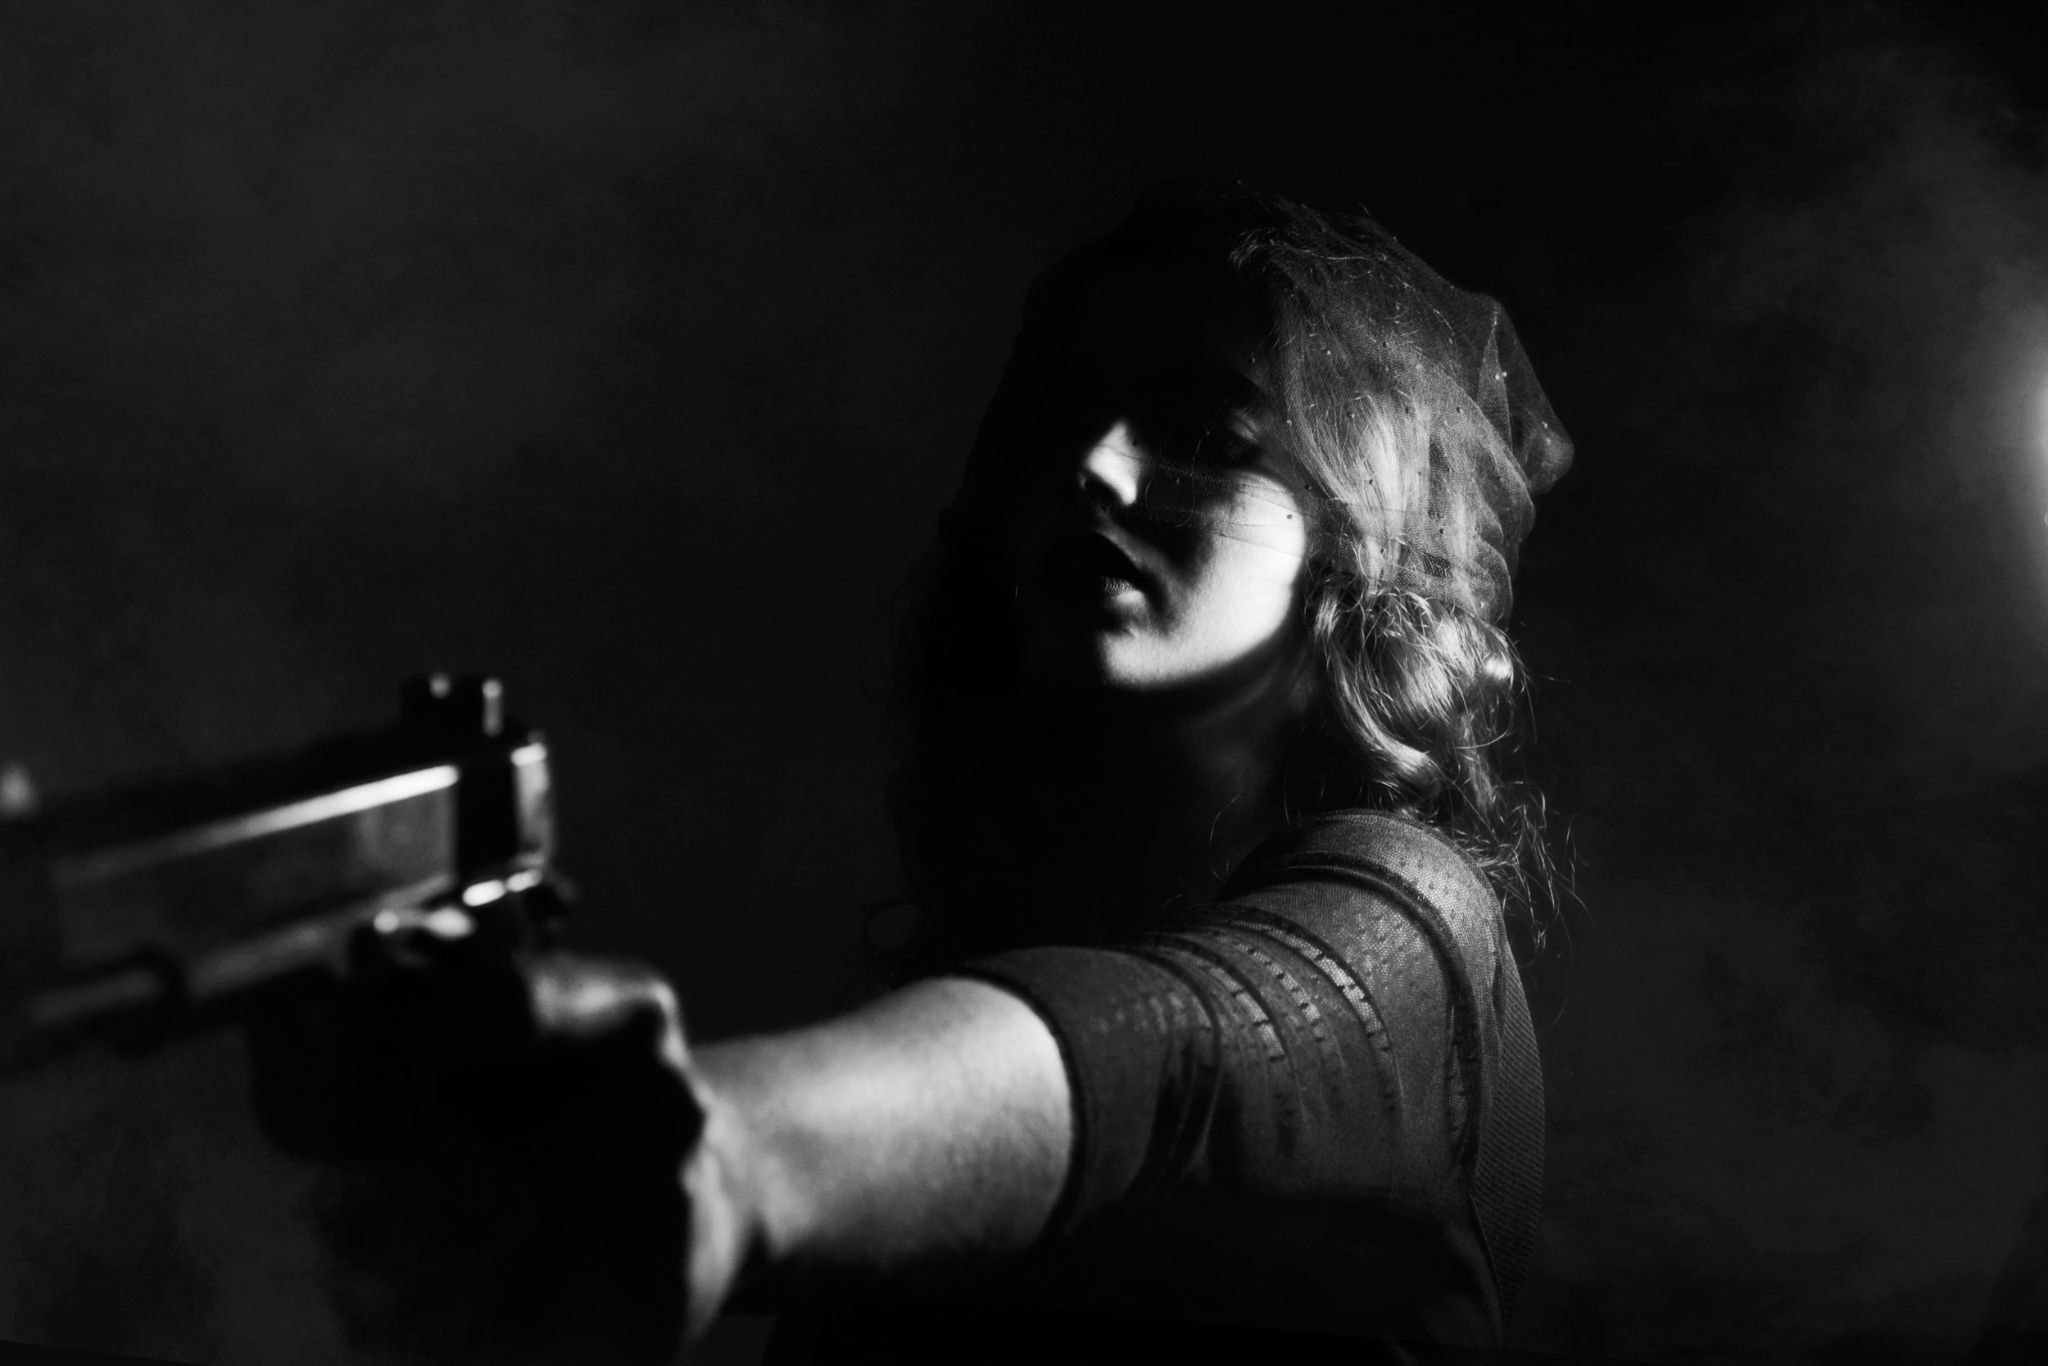 Black and white photo of a woman pointing a handgun